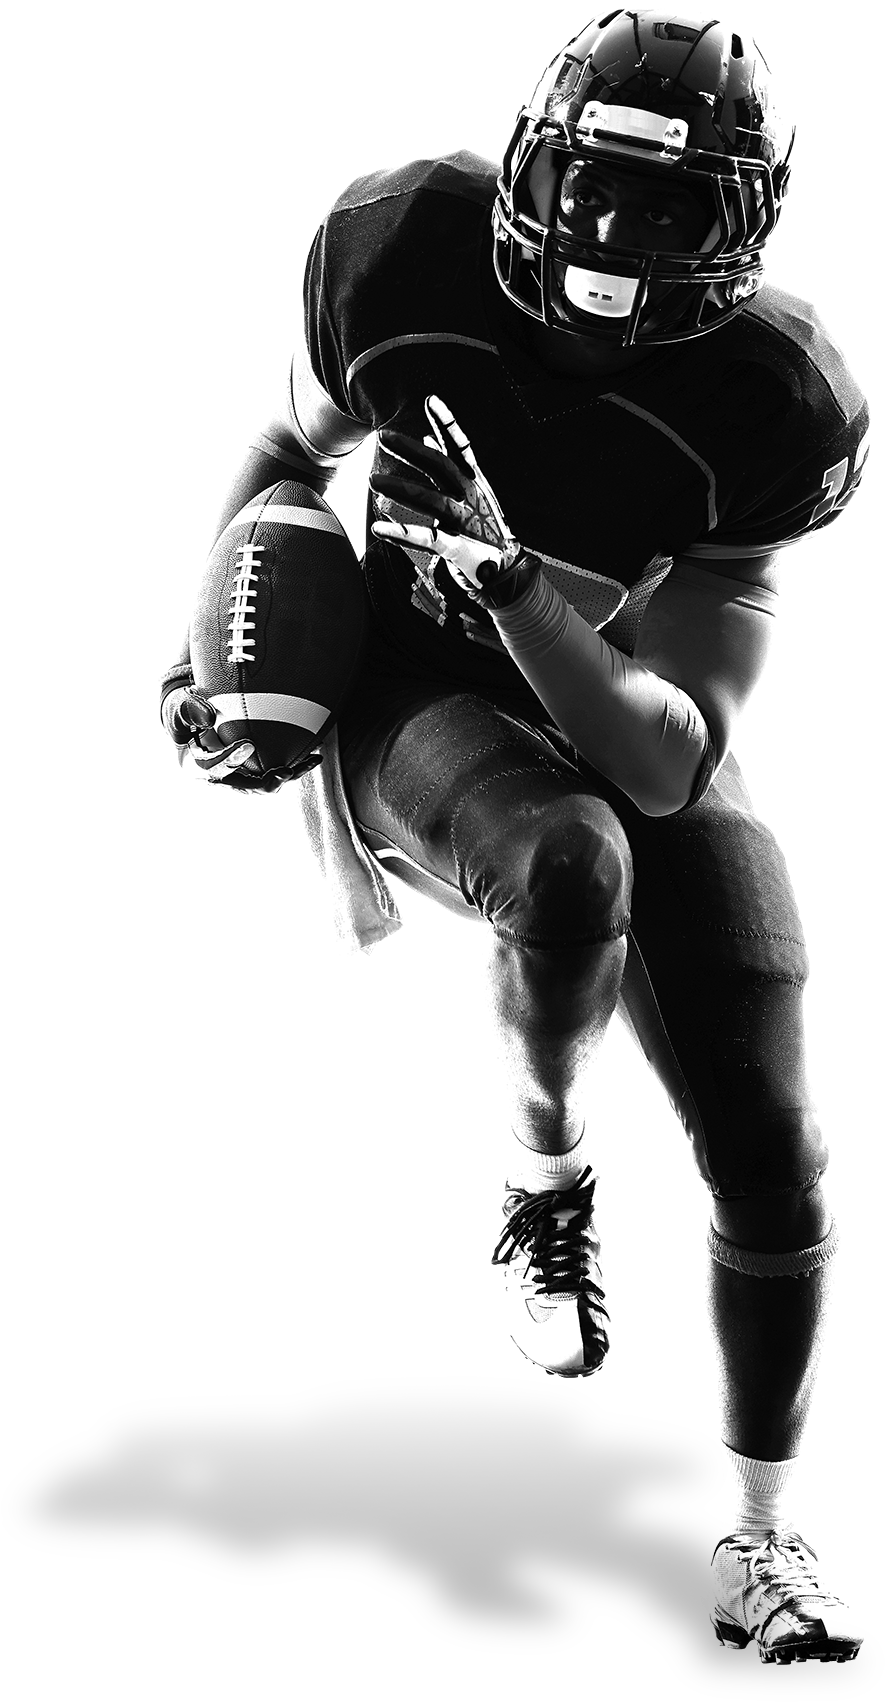 Player American Football Free Download Image PNG Image